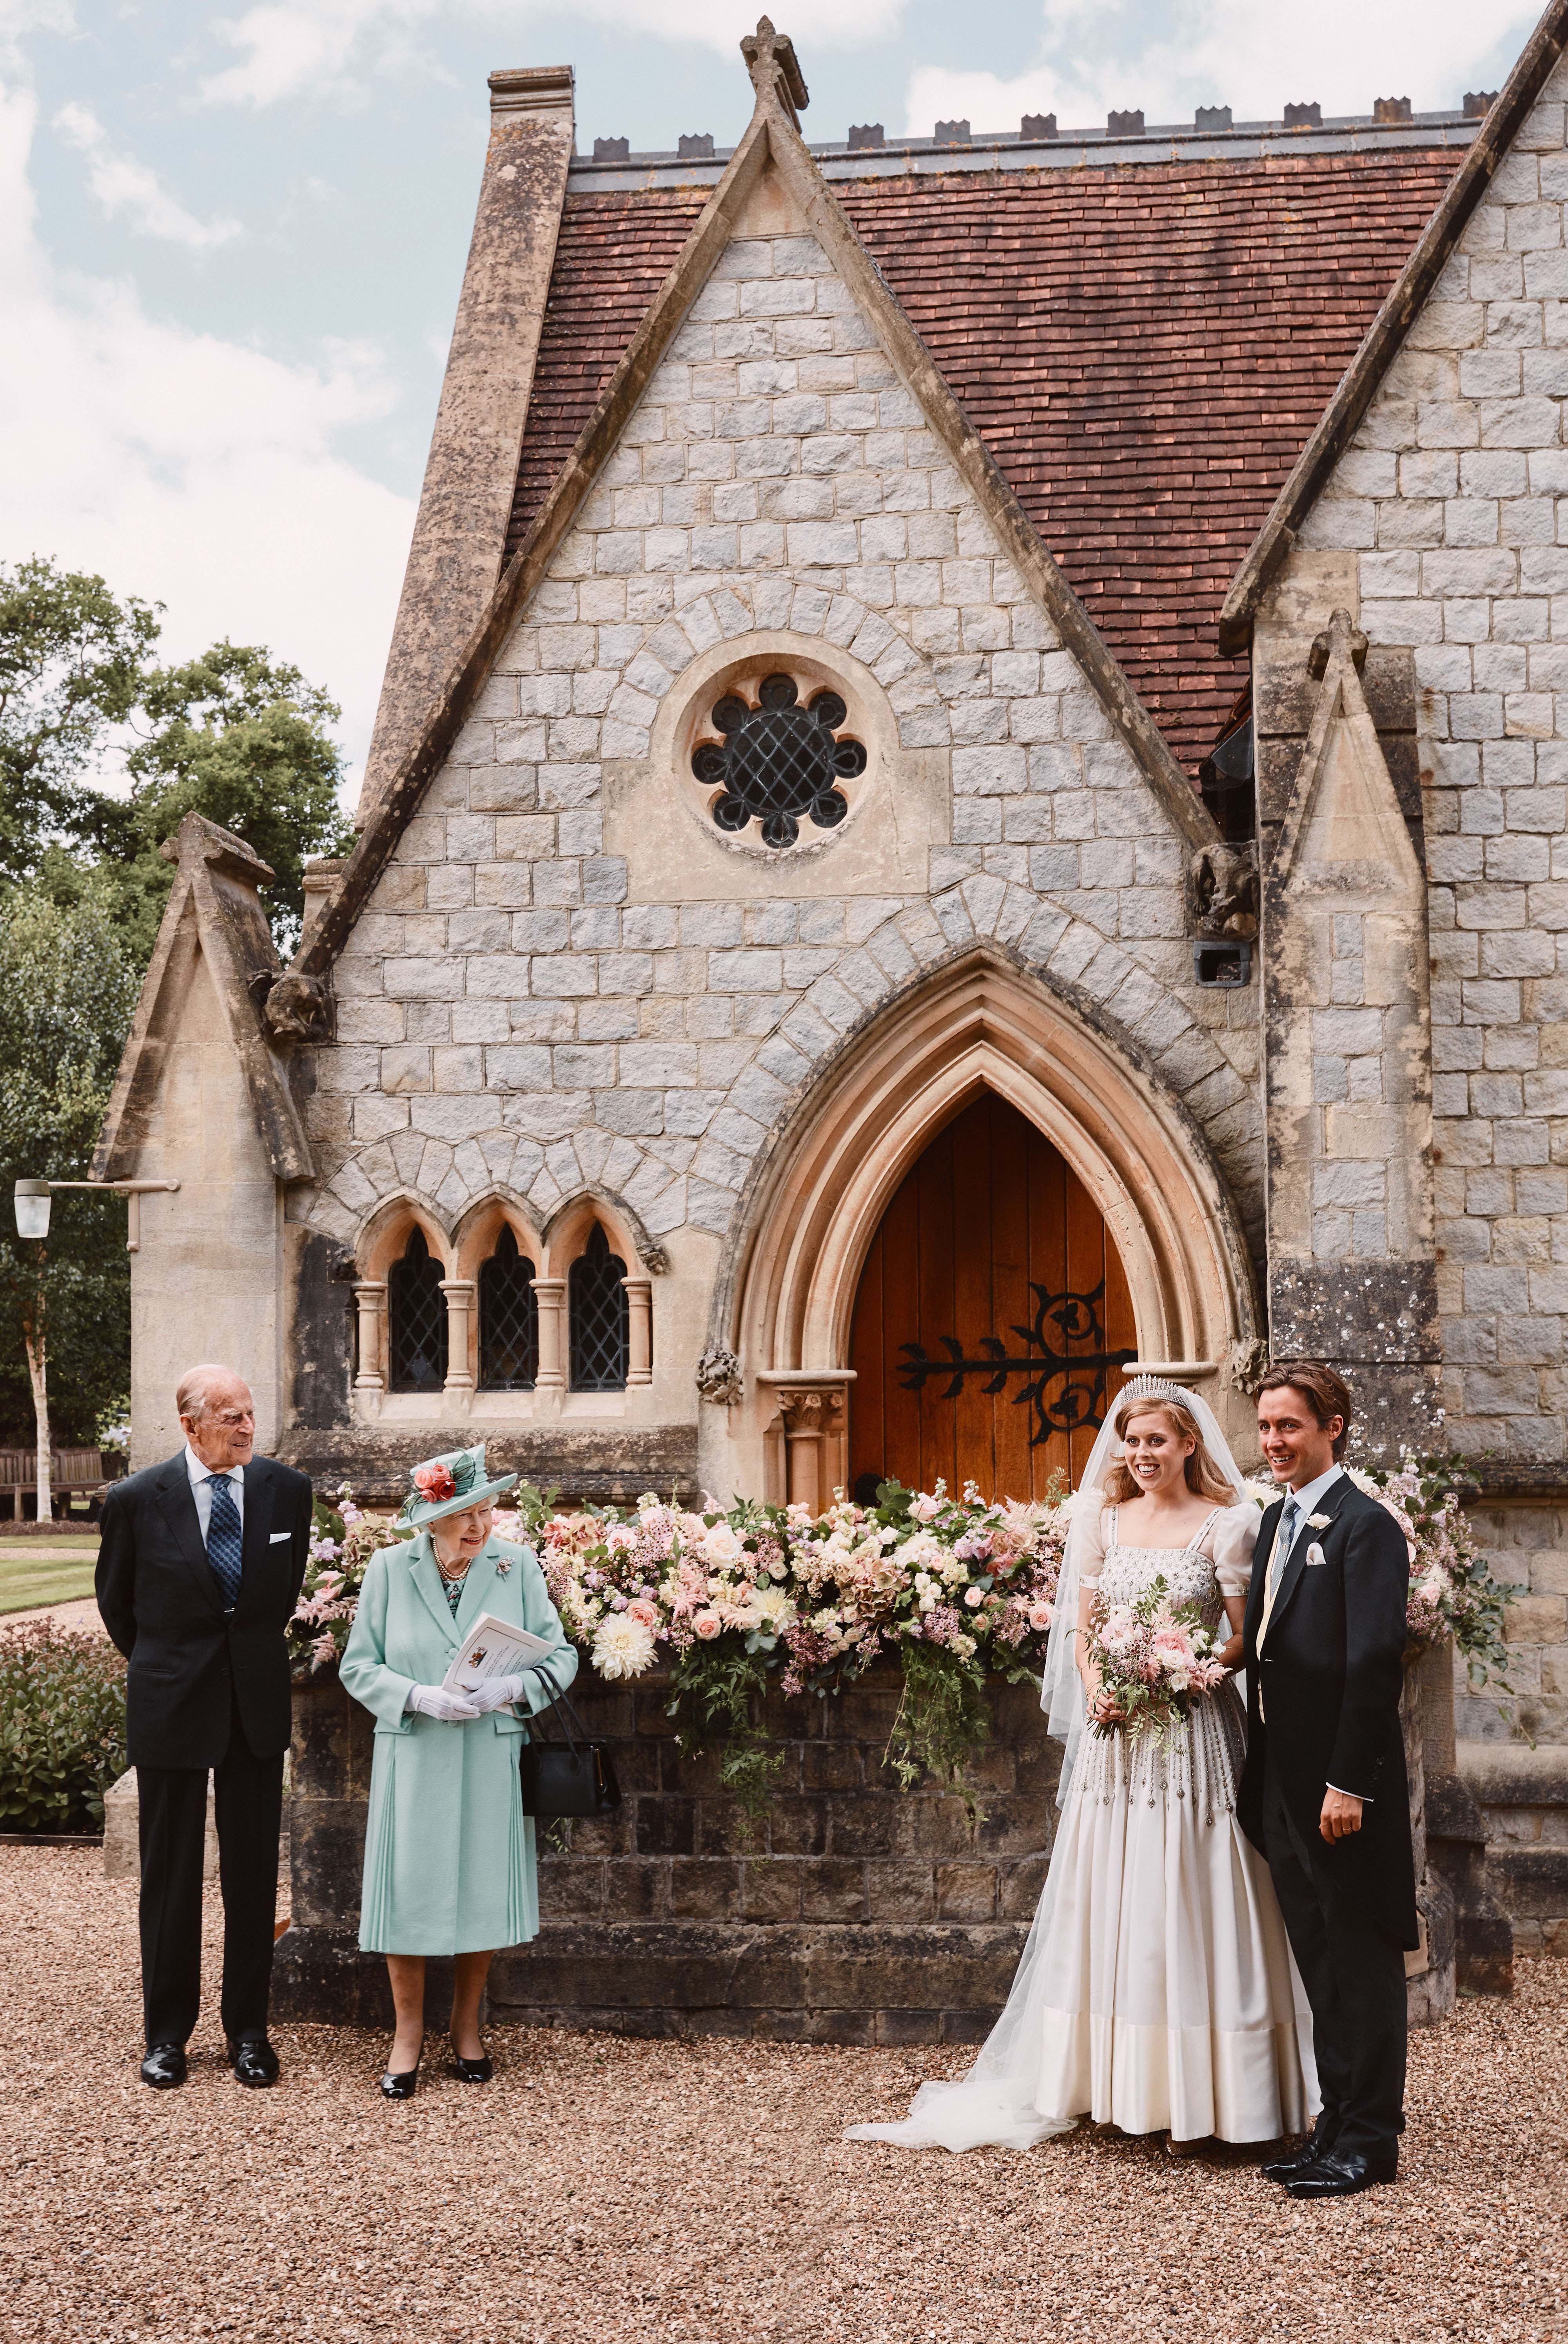 Princess Beatrice and Edoardo Mapelli Mozzi stands outside The Royal Chapel of All Saints at Royal Lodge, Windsor, after their wedding, with Queen Elizabeth II and Prince Philip, Duke of Edinburgh, on July 18, 2020, in England. | Source: Getty Images